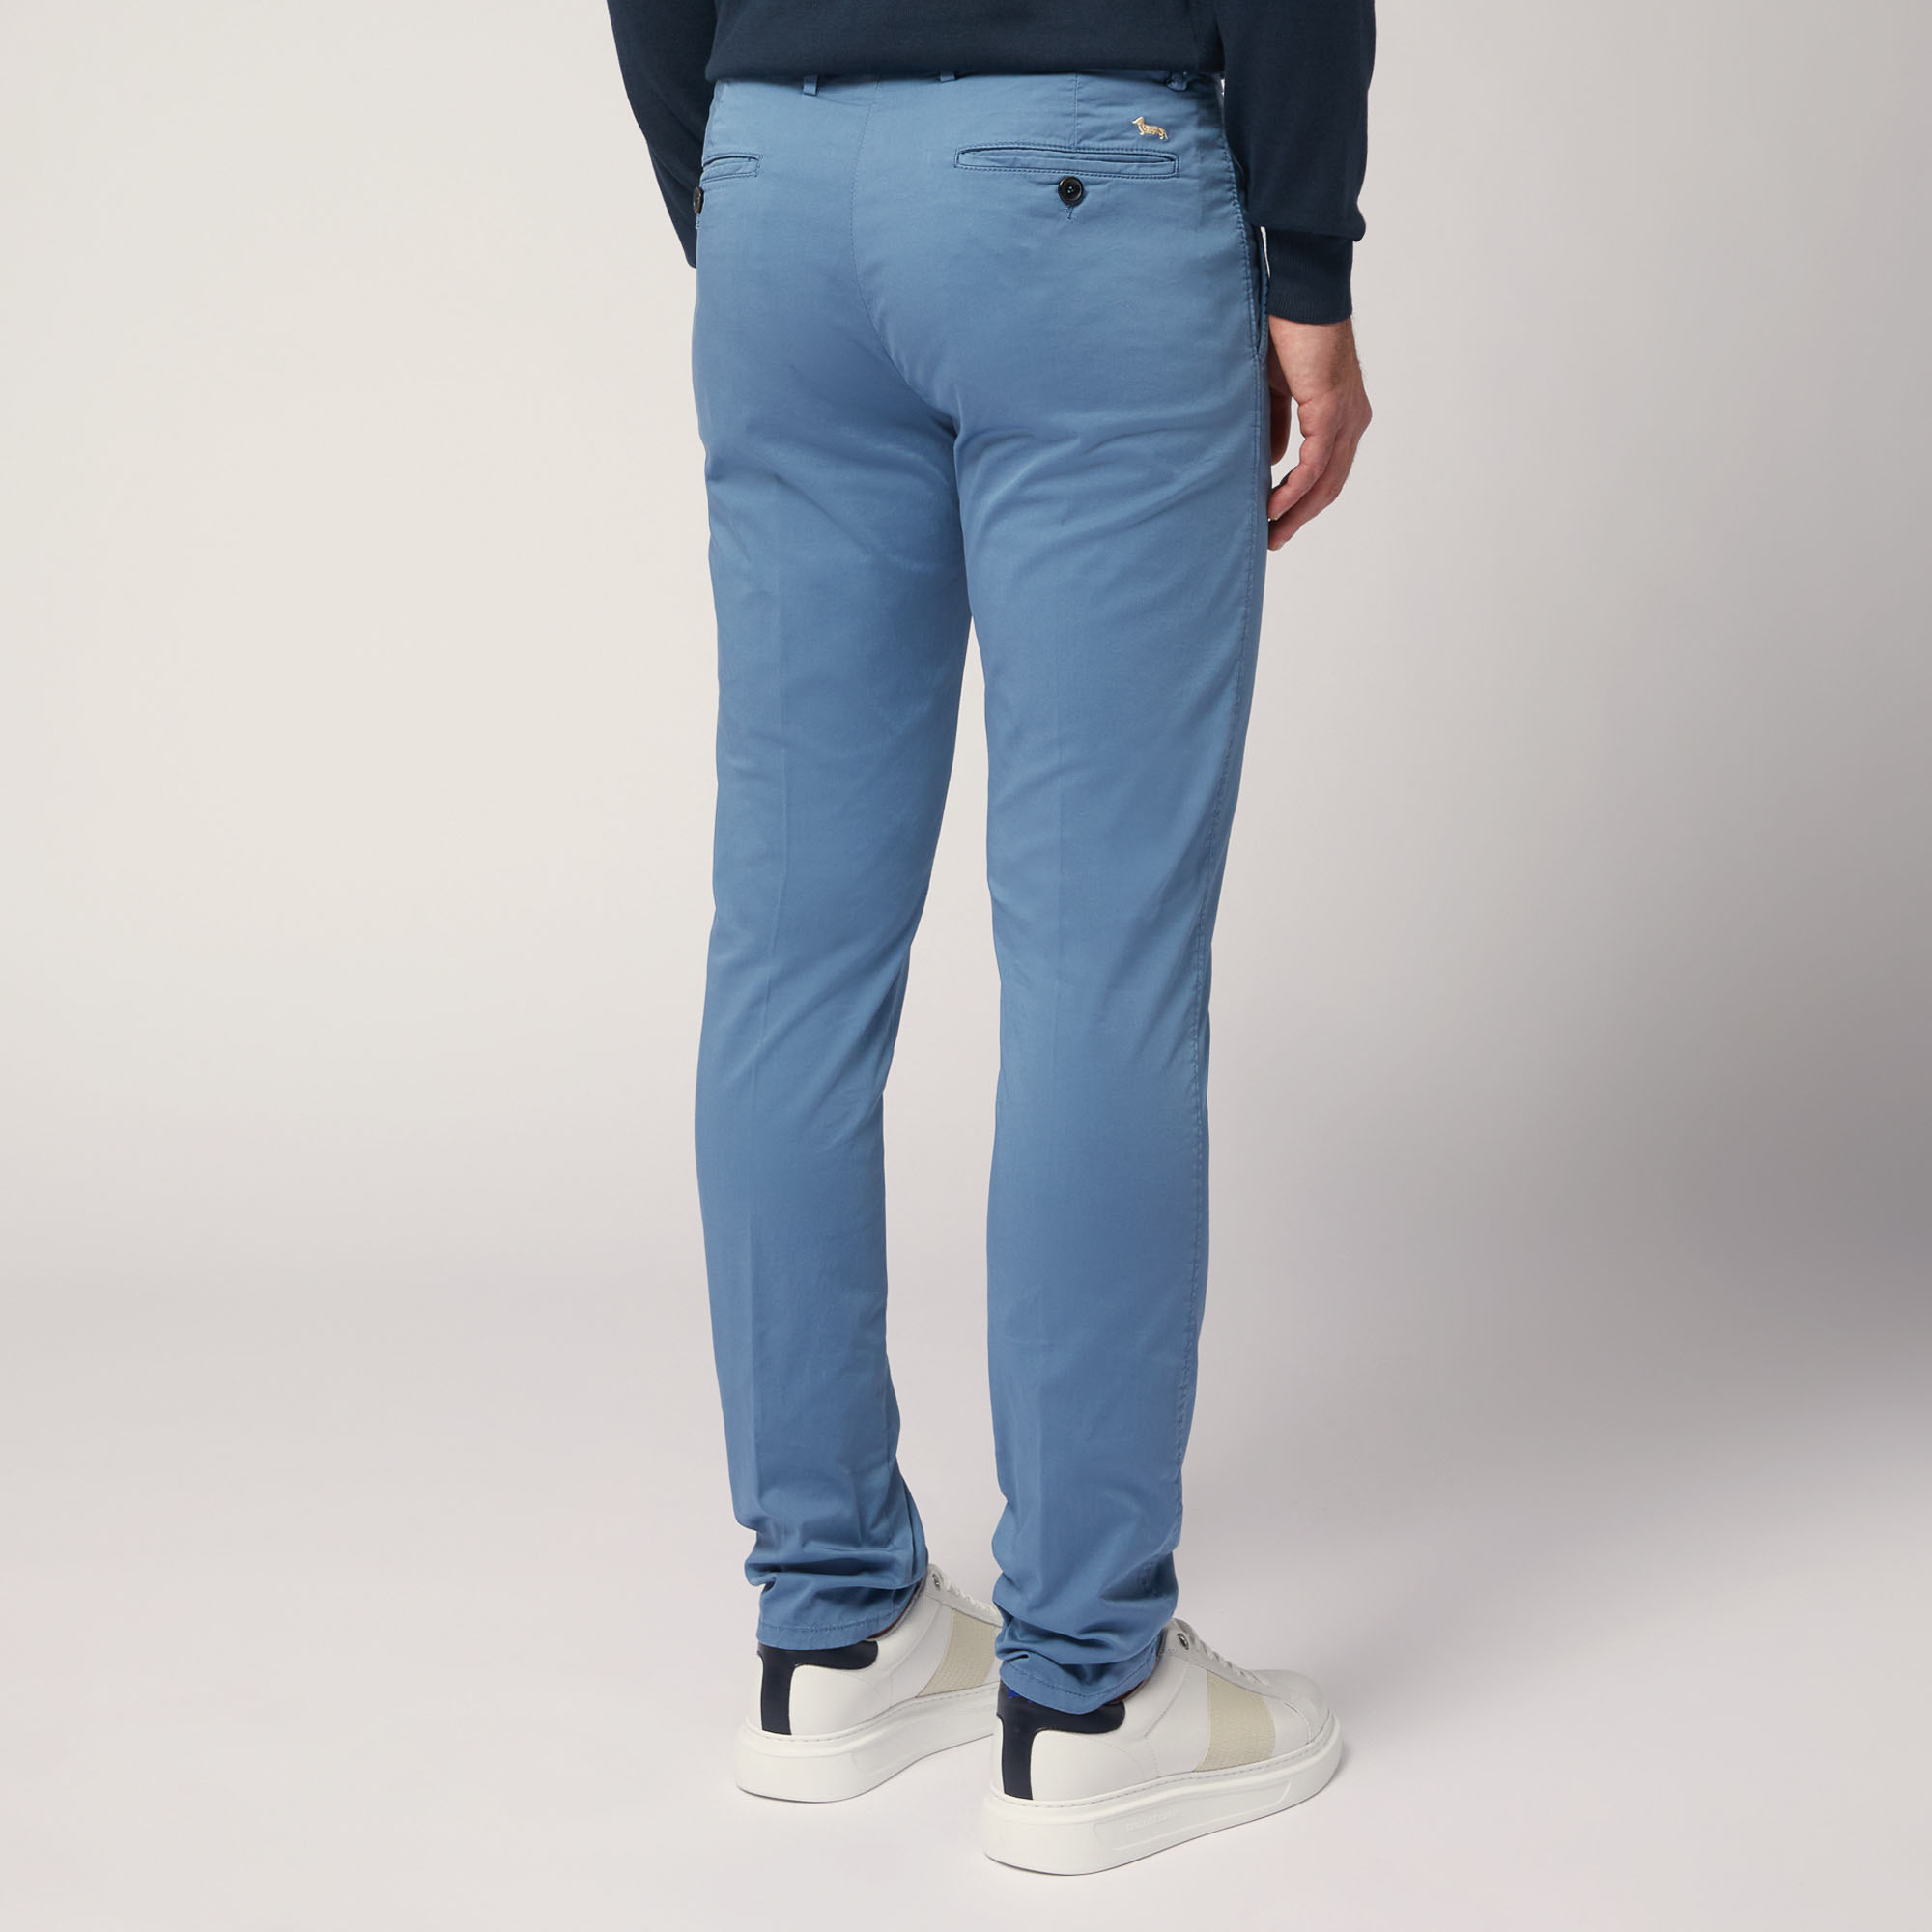 Narrow Fit Chino Pants, Blue, large image number 1